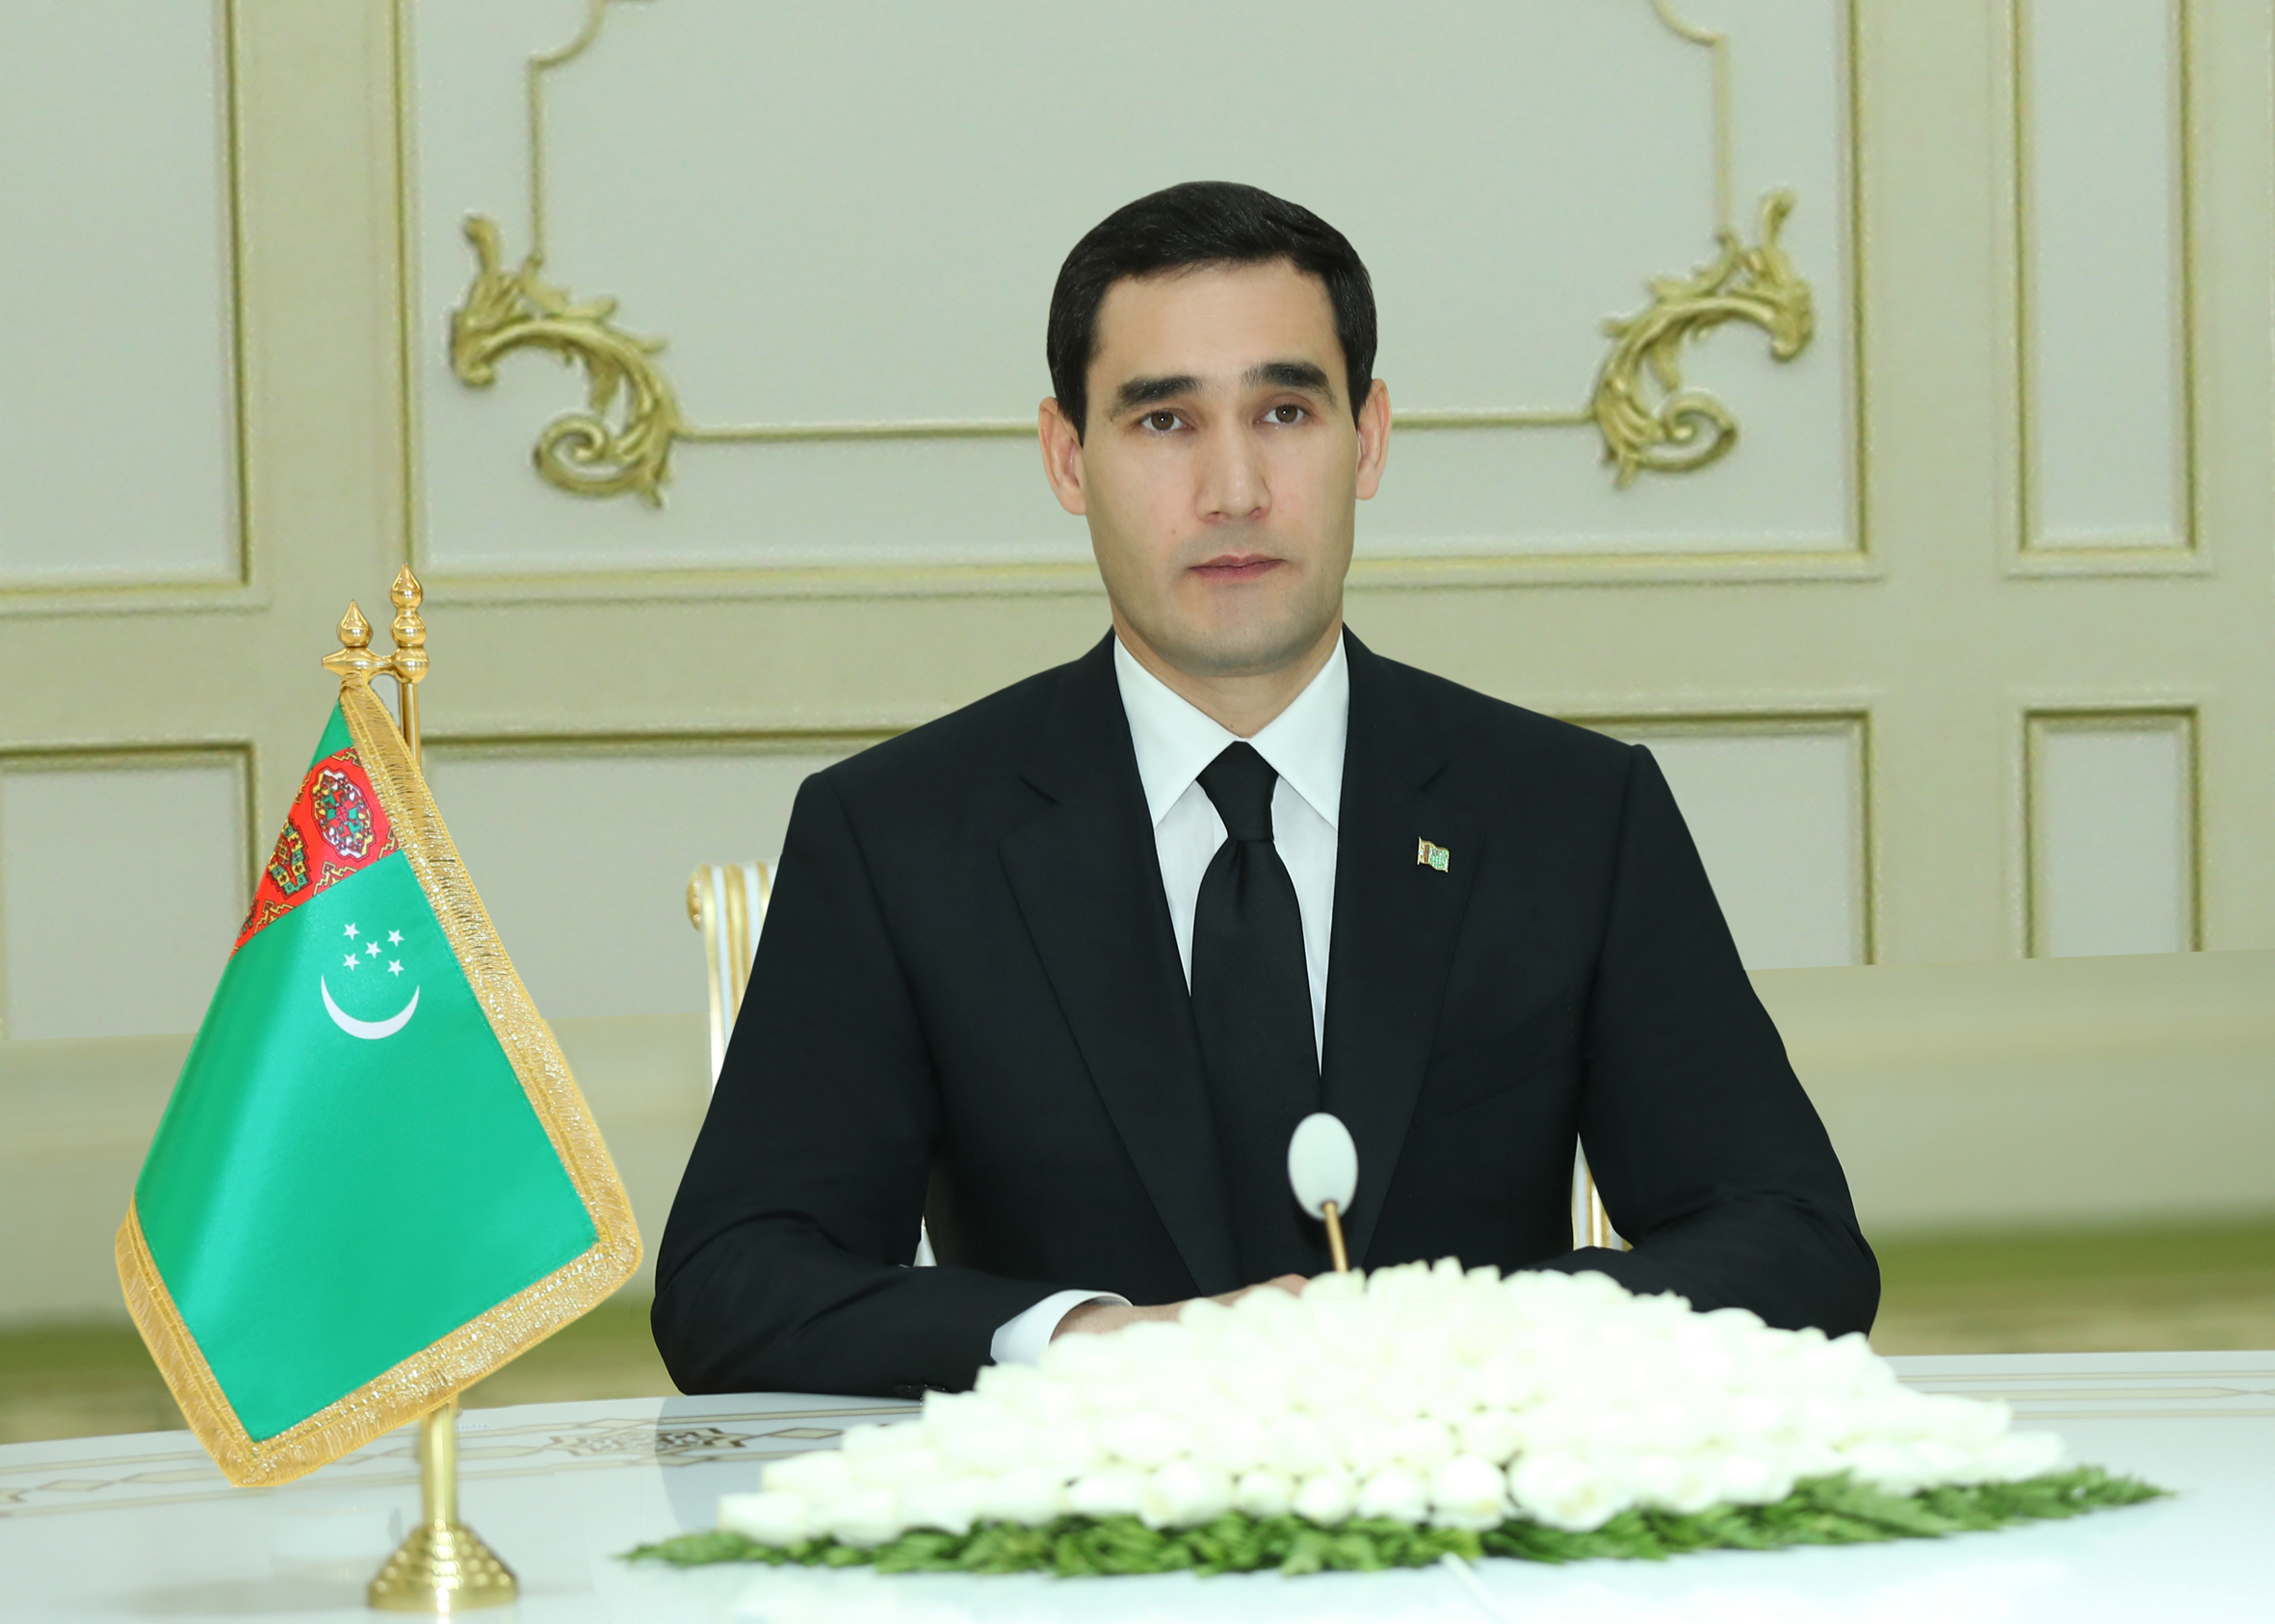 The President of Turkmenistan received the Chairwoman of the Federation Council of the Federal Assembly of the Russian Federation